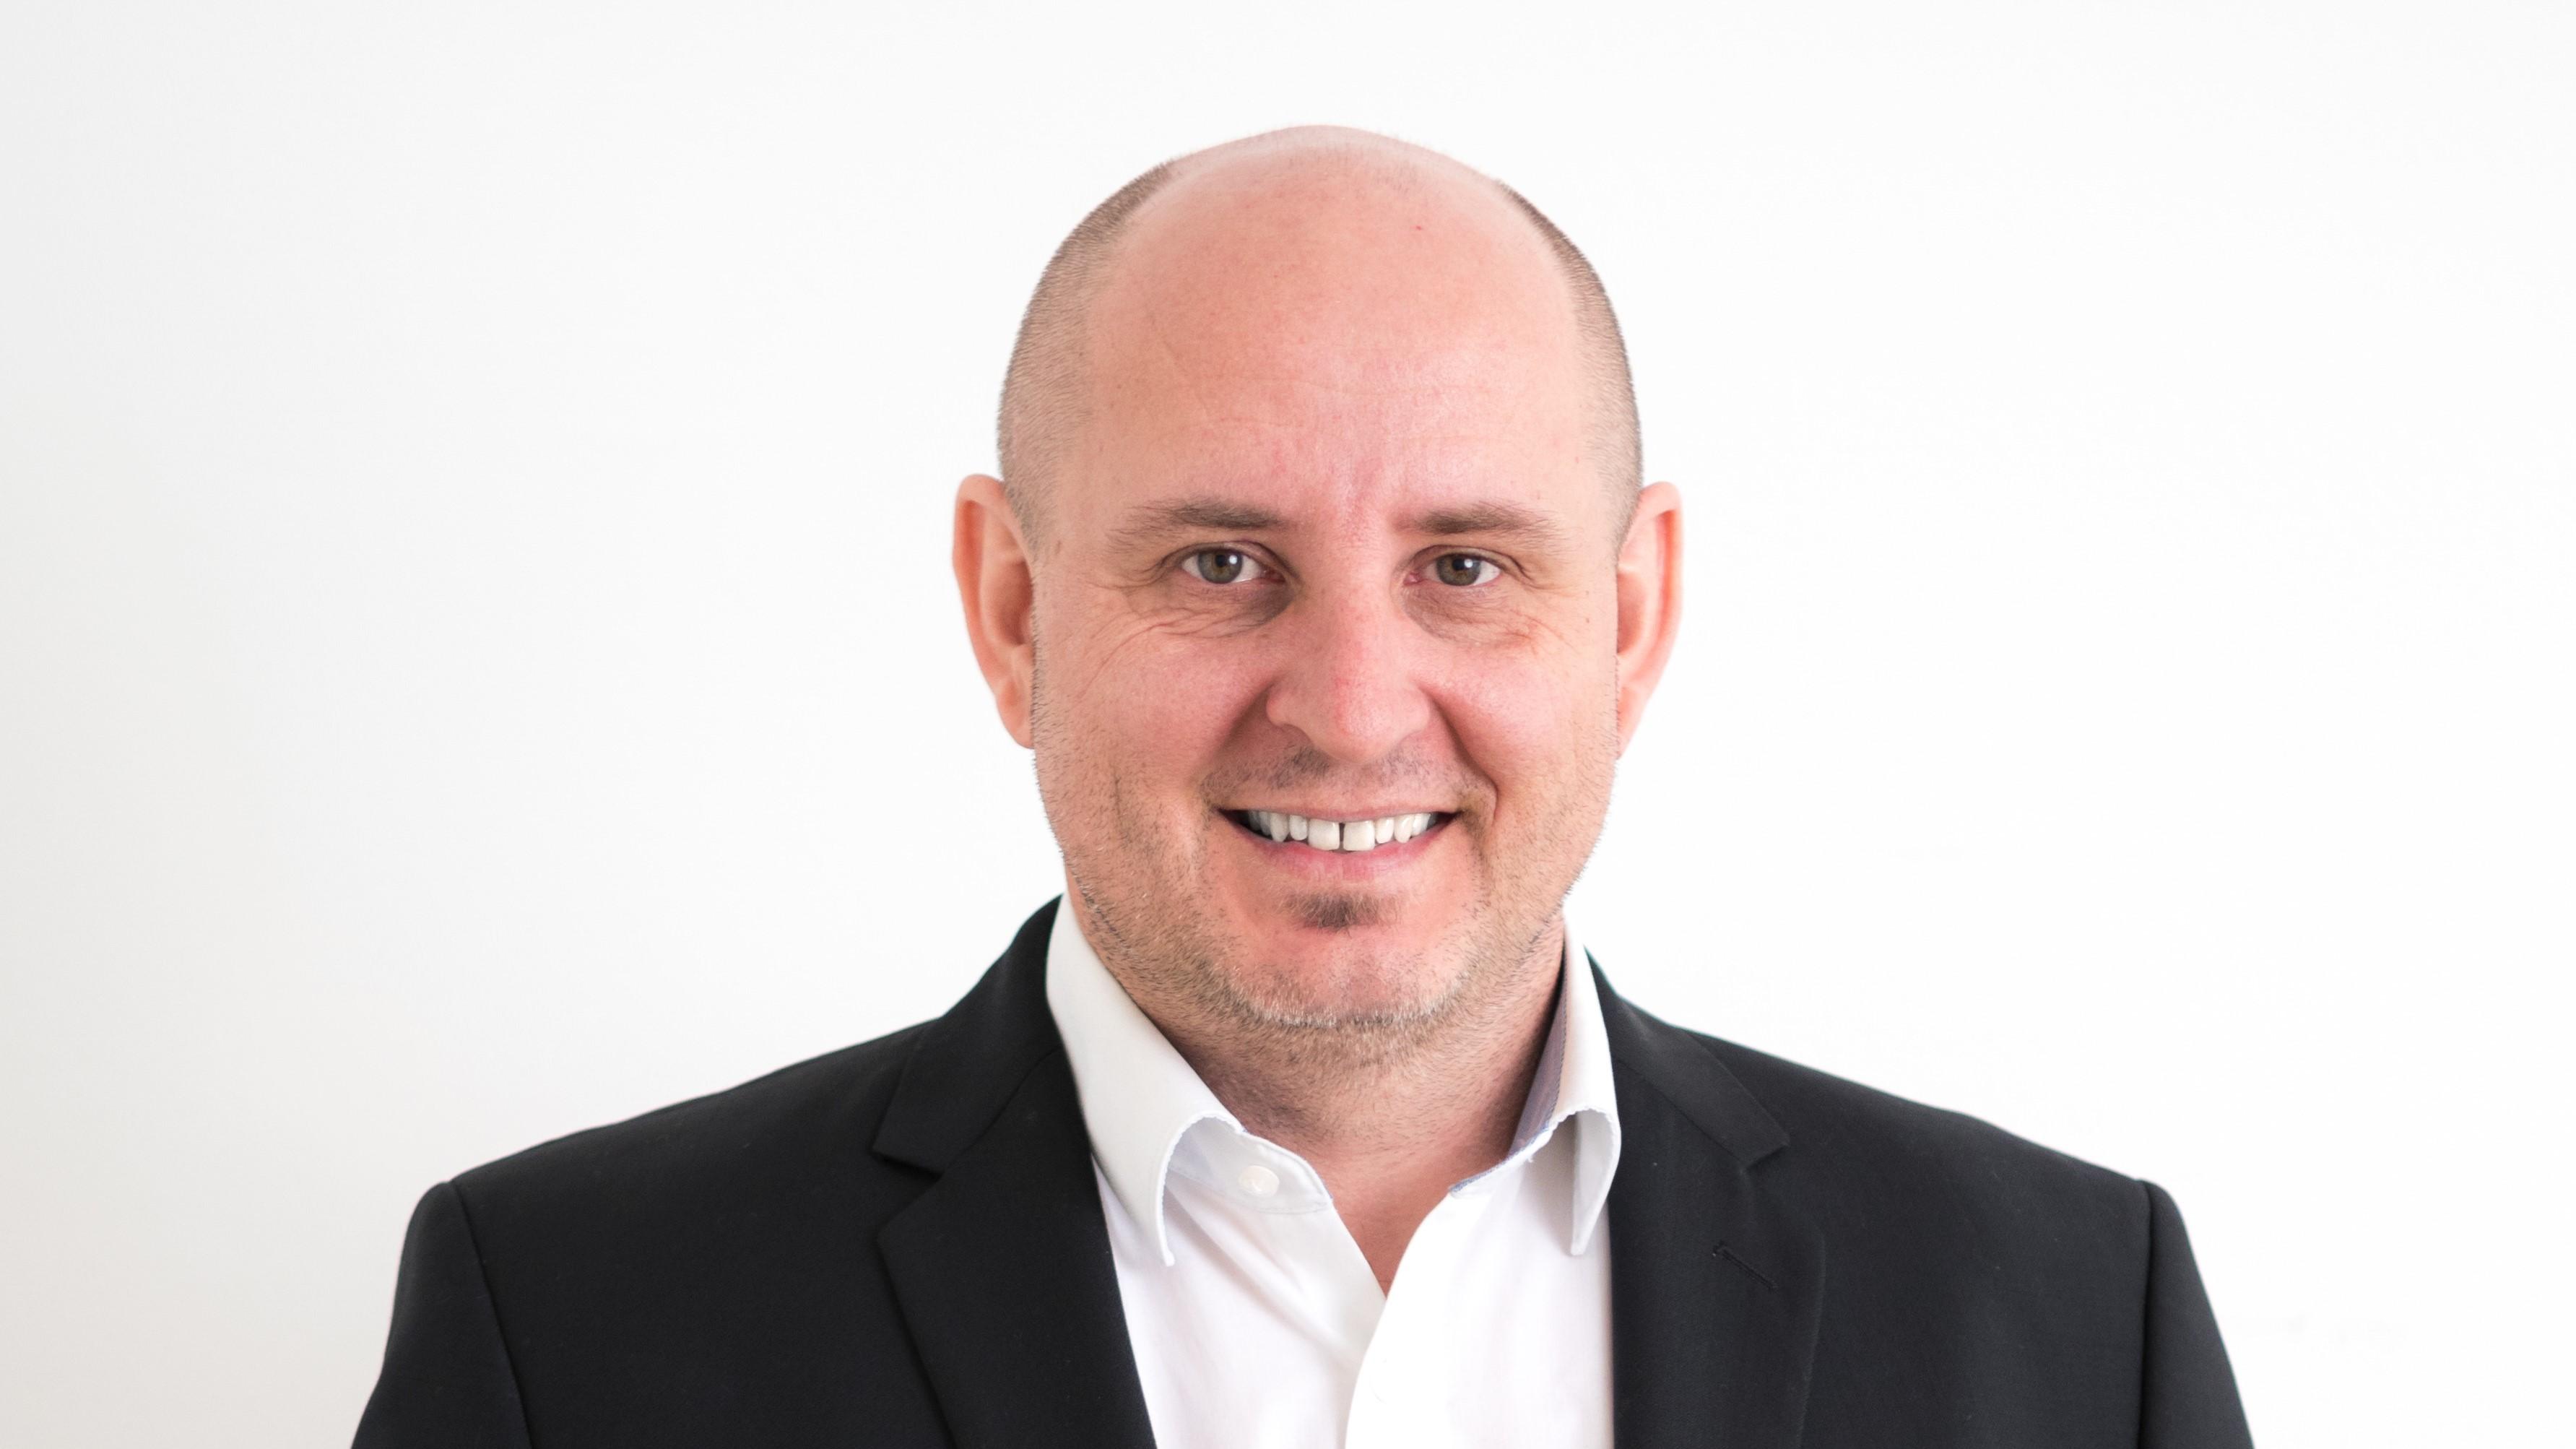 Thomas Renner ist Certified Digital Consultant